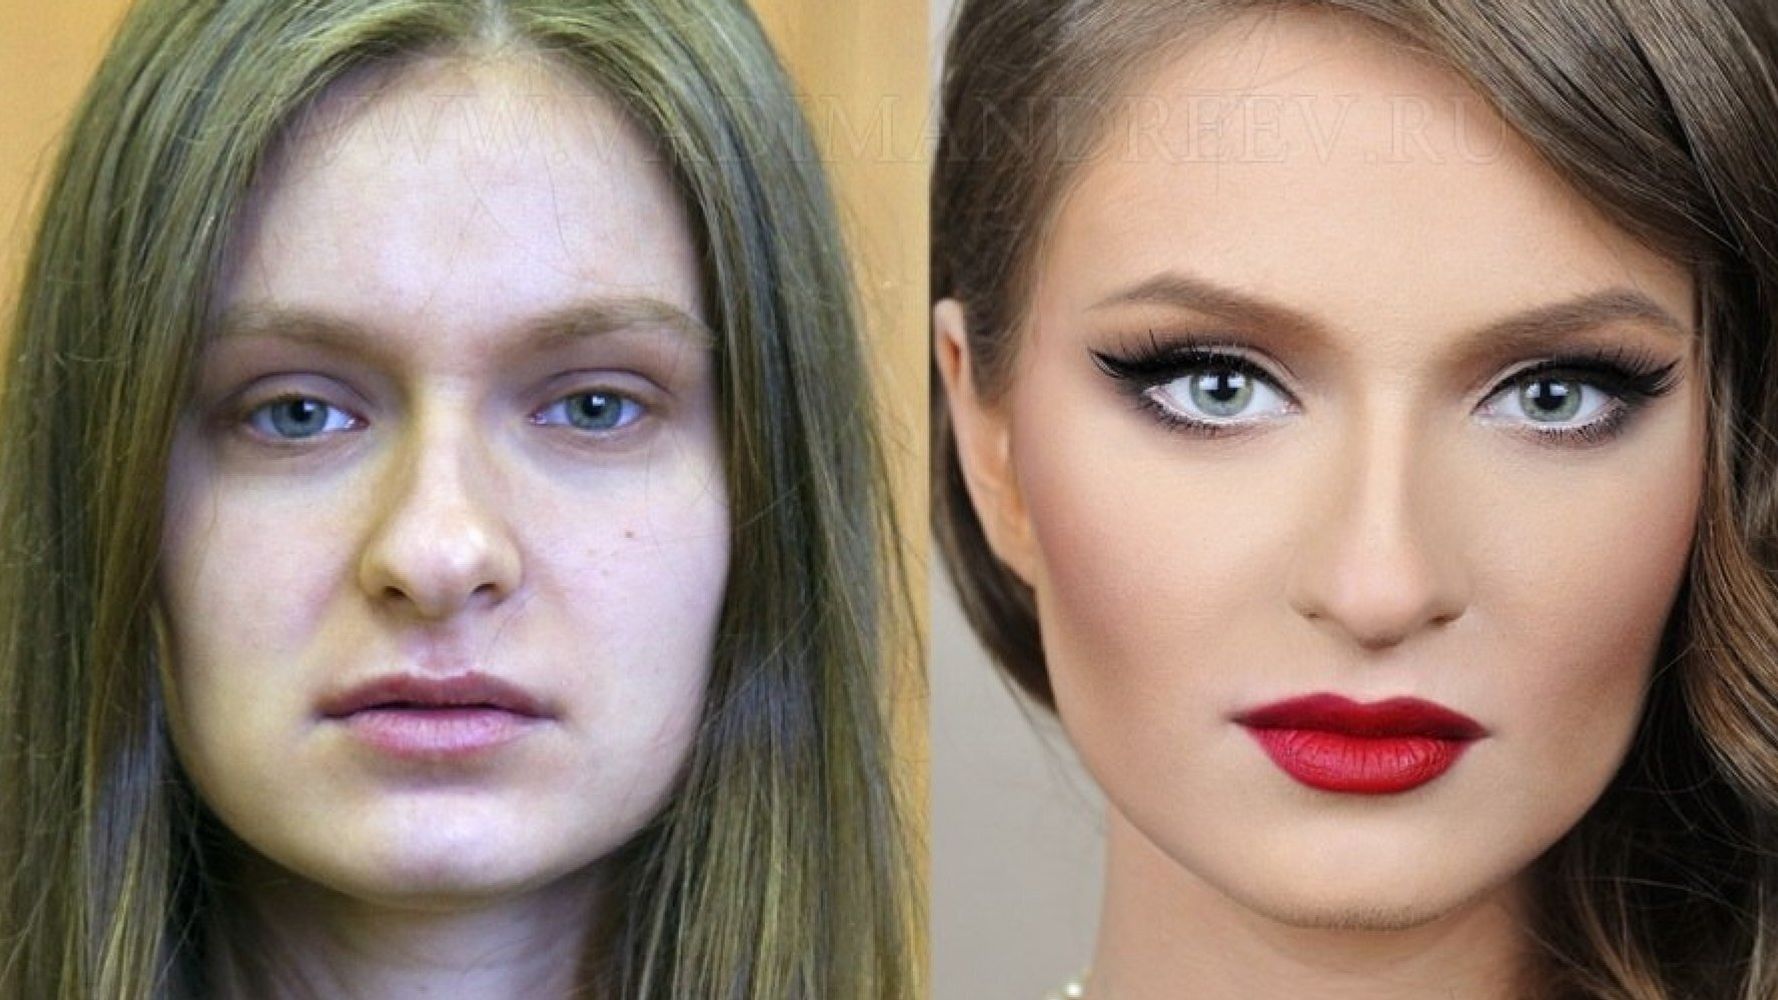 Make Up Artist Reveals Jaw Dropping Before And After Photos Of Women 7633